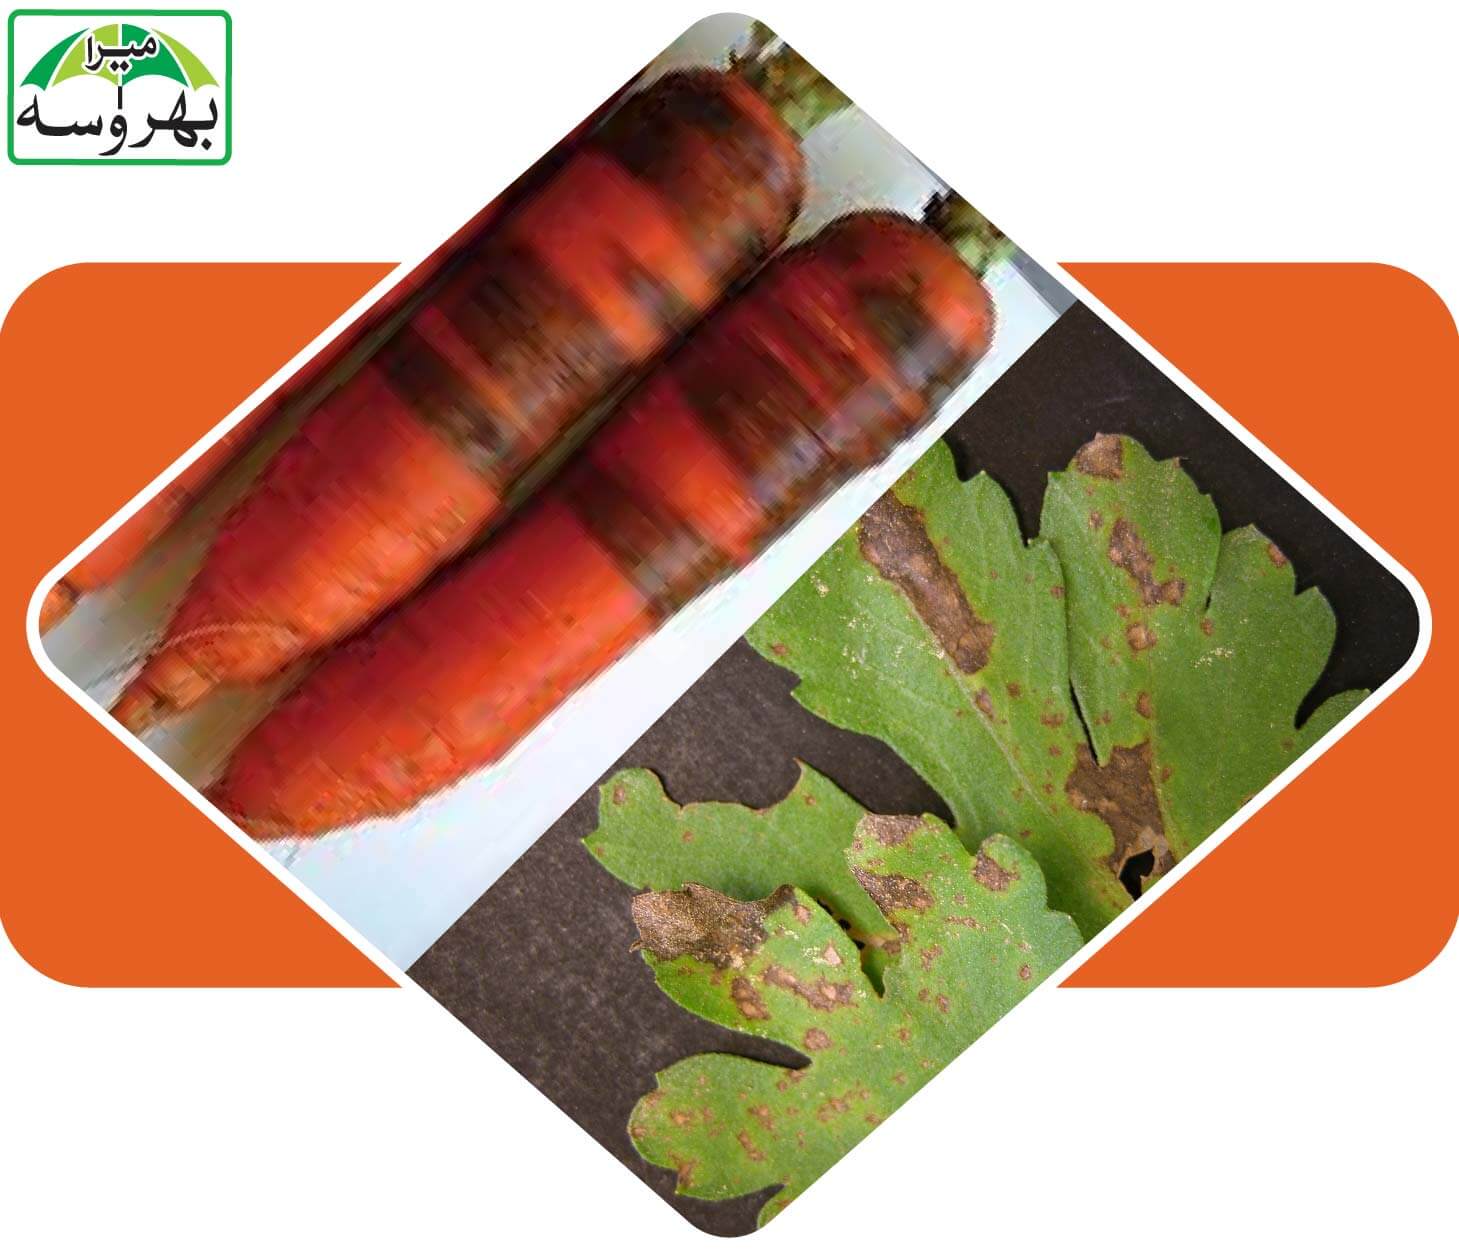 Phytophthora Root Rot and Septoria Leaf Spot